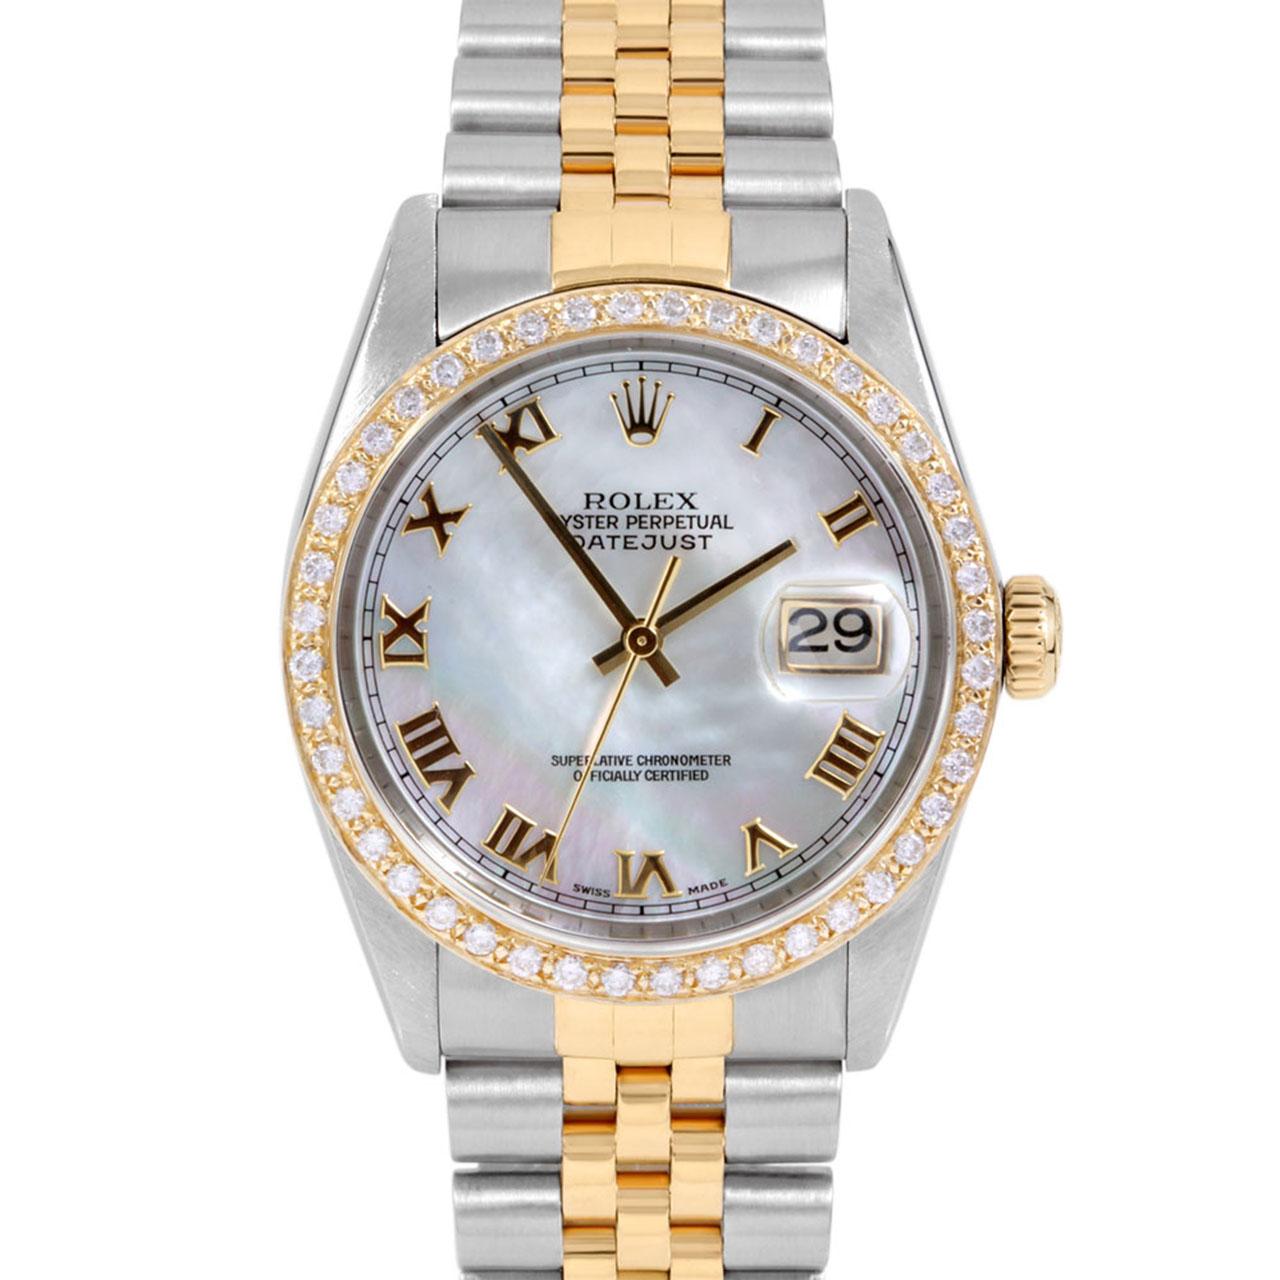 Swiss Wrist - 

Brand : Rolex
Model : Datejust Ref# 16013 - Plastic Quickset Model 
Gender : Mens
Metals : 14K Yellow Gold/ Stainless Steel
Case Size : 36 mm
Dial : Custom Mother Of Pearl Roman Numeral Dial (This dial is not original Rolex And has